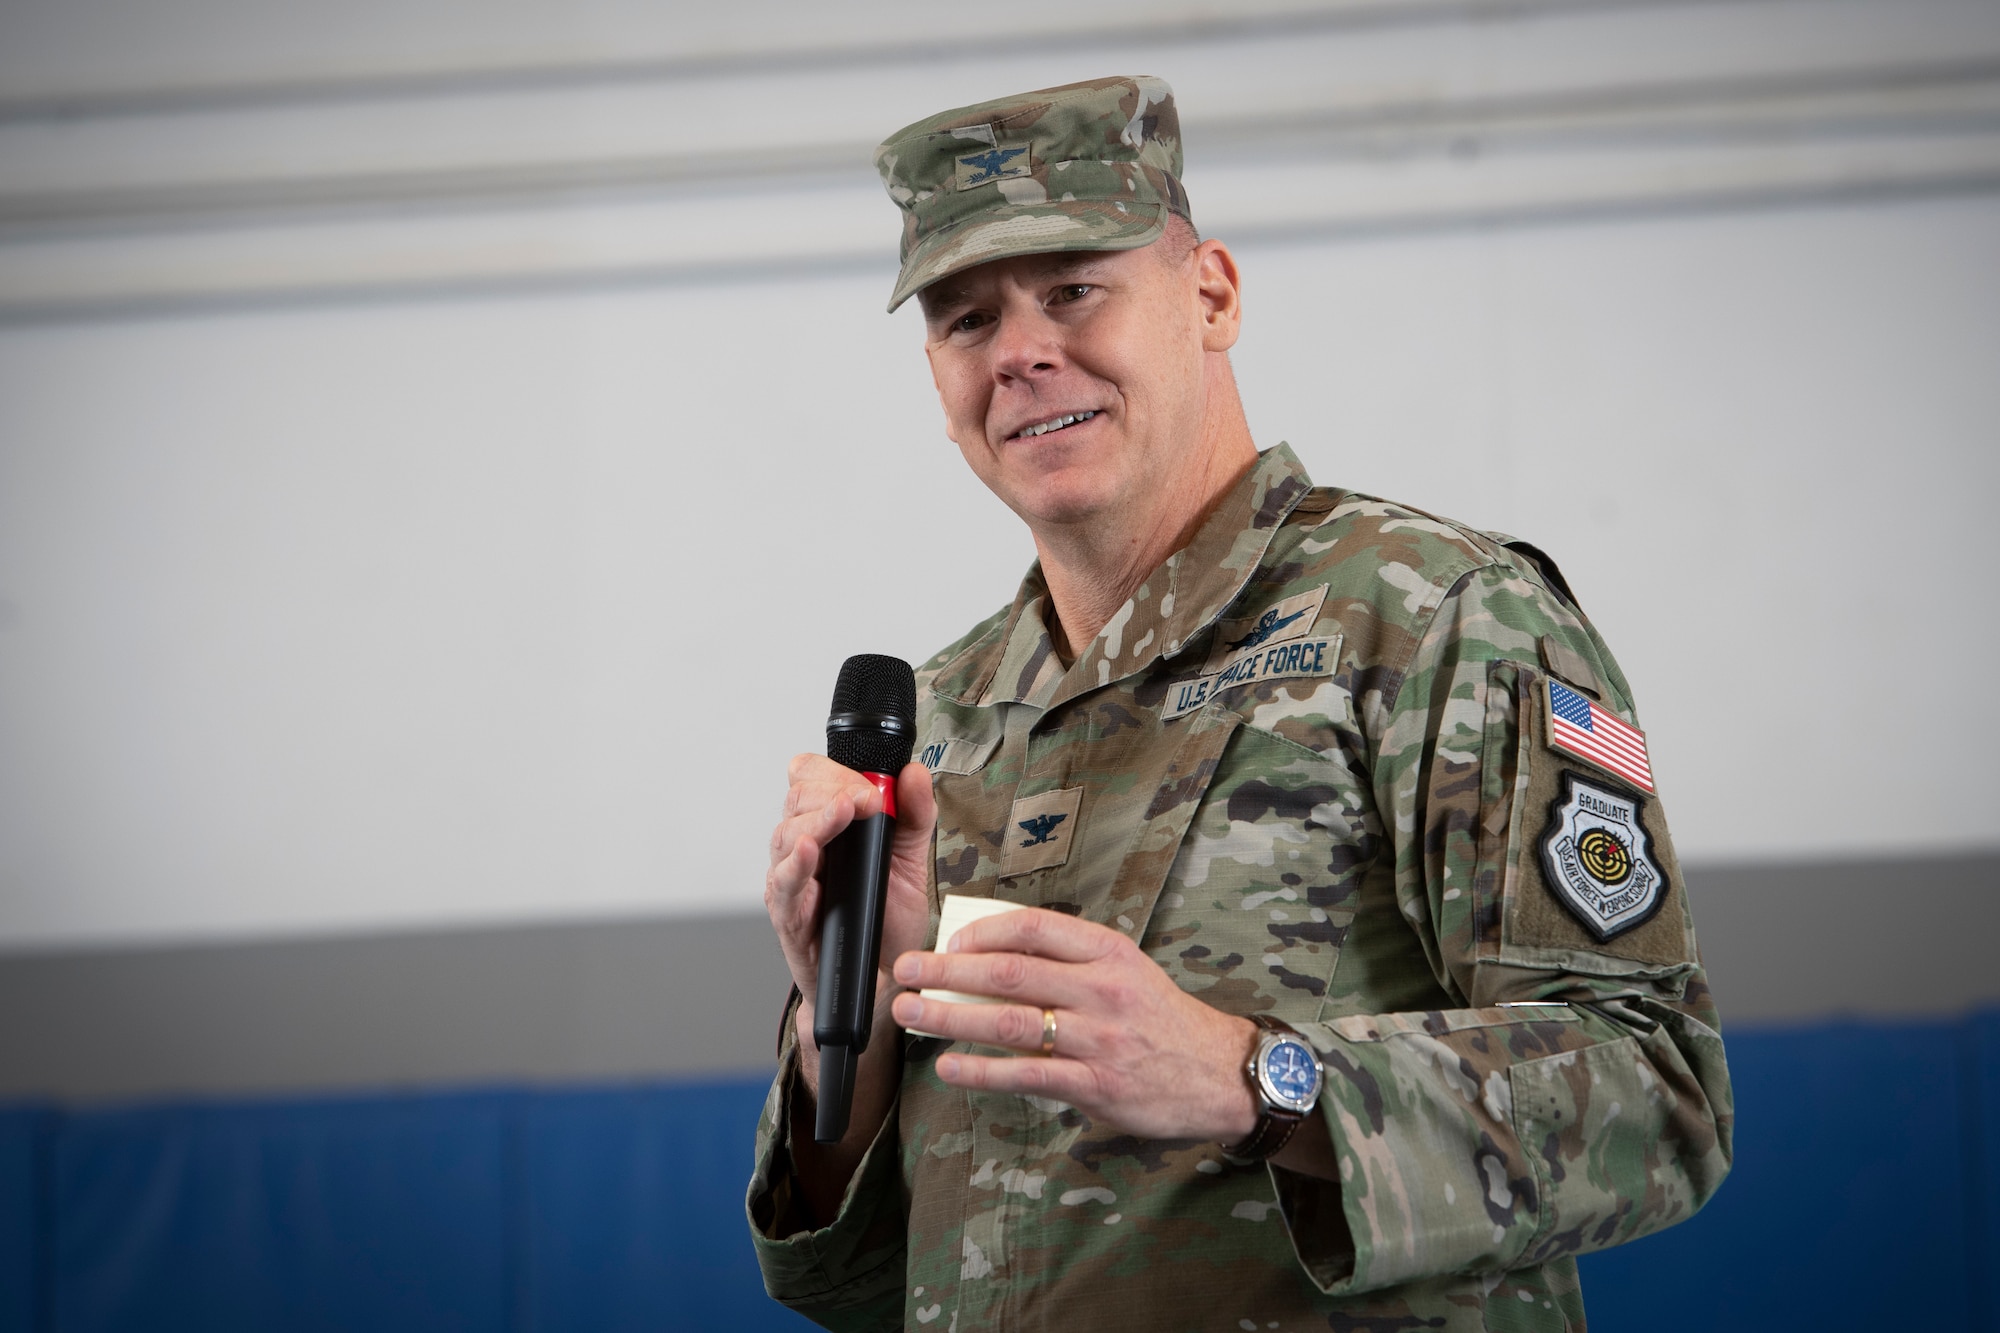 U.S. Space Force Col. Stephen Lyon, Space Delta 15 commander, gives remarks during the DEL 15 activation ceremony at Schriever Space Force Base, Colorado, March 10, 2023. Lyon is triple-hatted as the Joint Task Force-Space Defense director of operations, National Space Defense Center director, and commander of DEL 15. The mission of DEL 15 is to provide service command-and-control (C2) capability, mission ready crew forces, skills training, certifications, intelligence, surveillance, and reconnaissance (ISR), and support and cyber mission defense, and special mission support to the JTF-SD and its NSDC. (U.S. Space Force photo by Dennis Rogers)